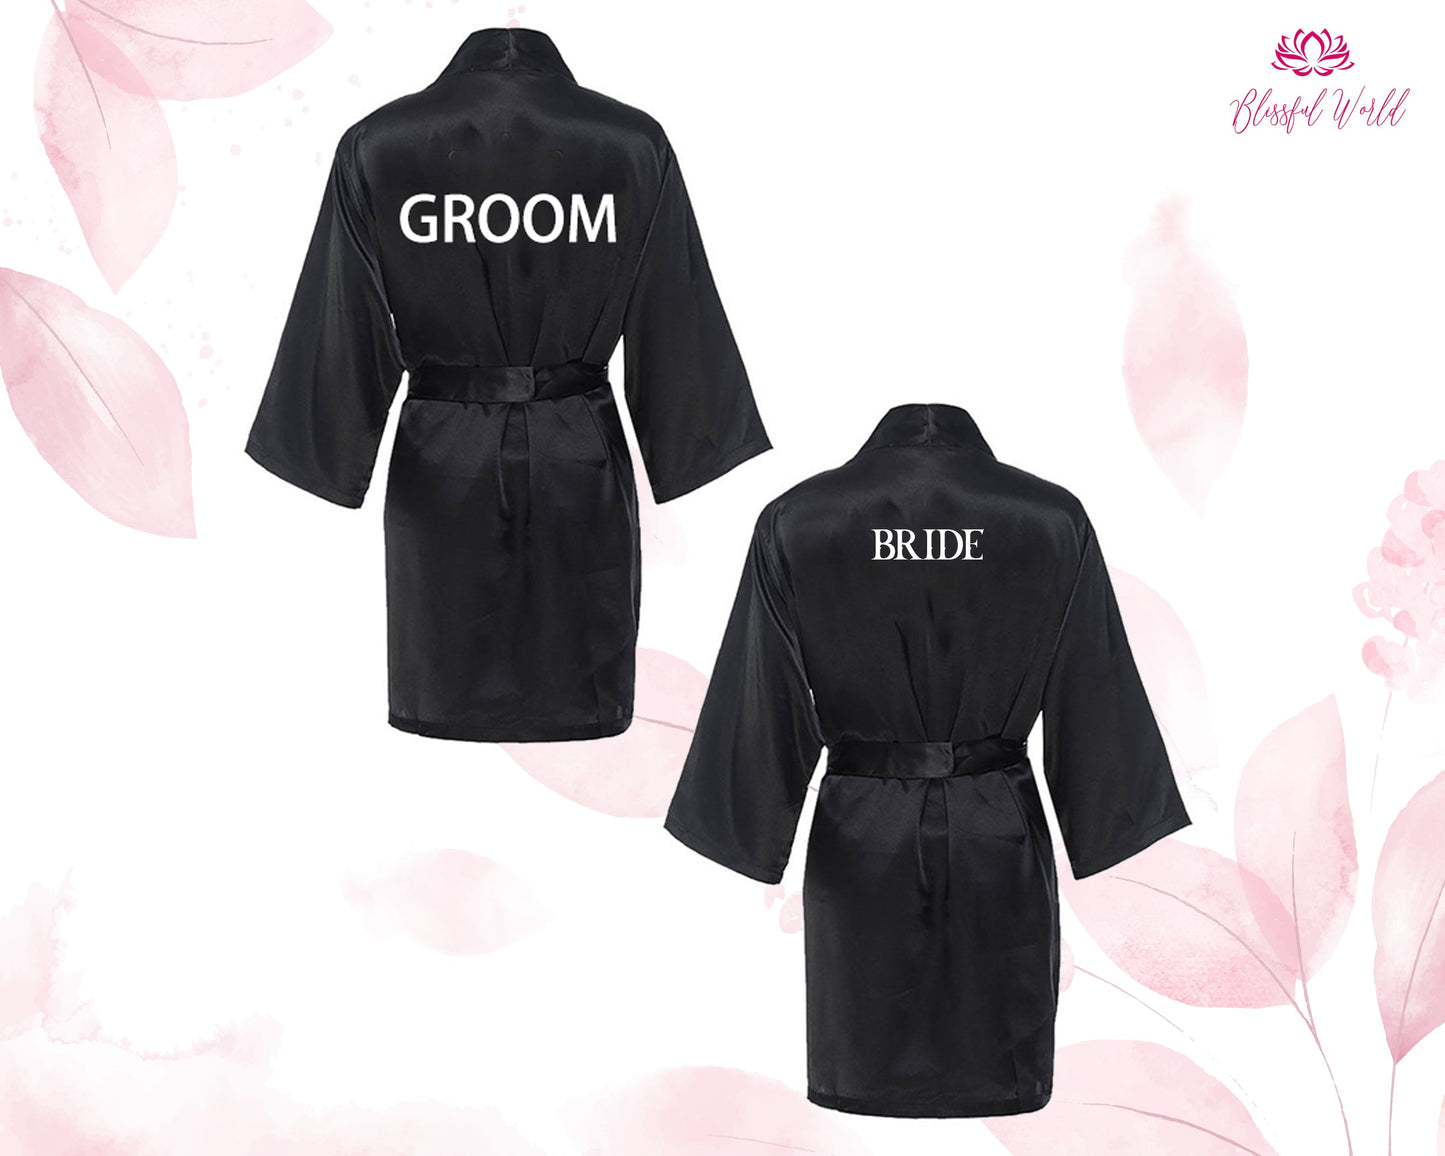 Groom and Bride Satin Robes, Customized Wedding robes, Personalized robes, Anniversary gift, Honeymoon gift, Custom Satin gown,